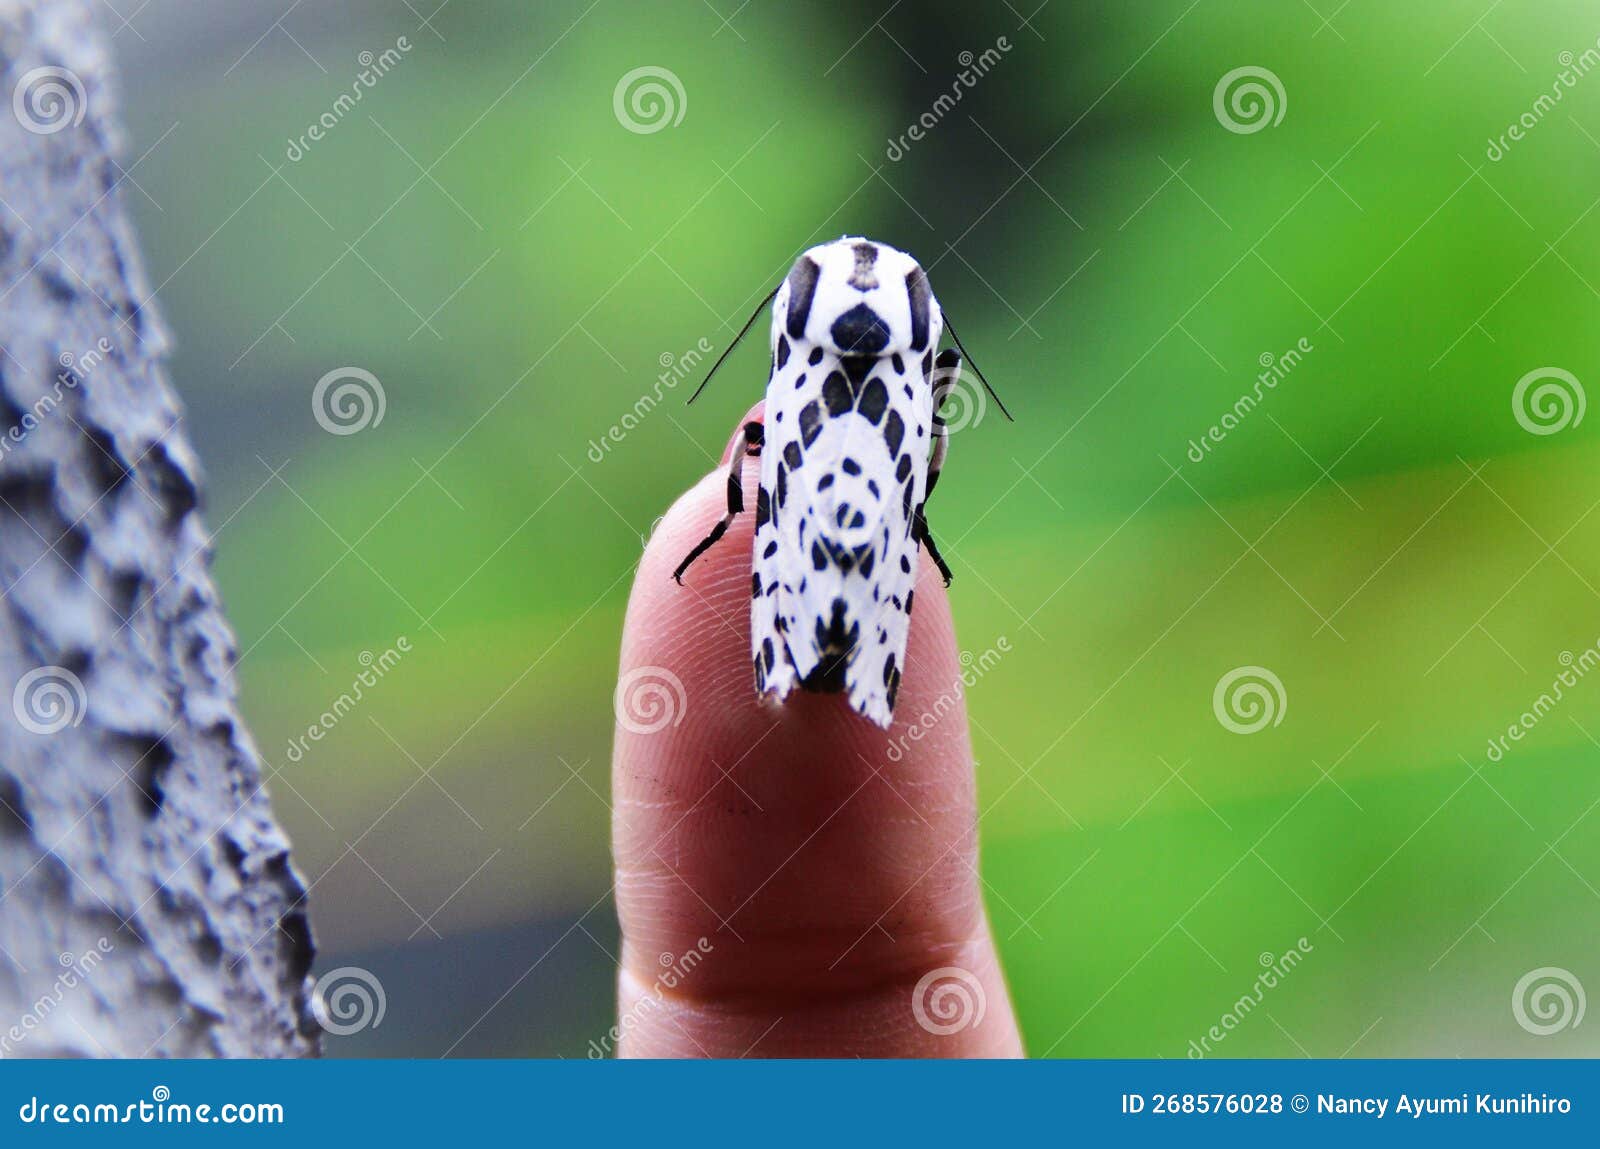 the beautiful white and black scribe hypercompe wing on the finger